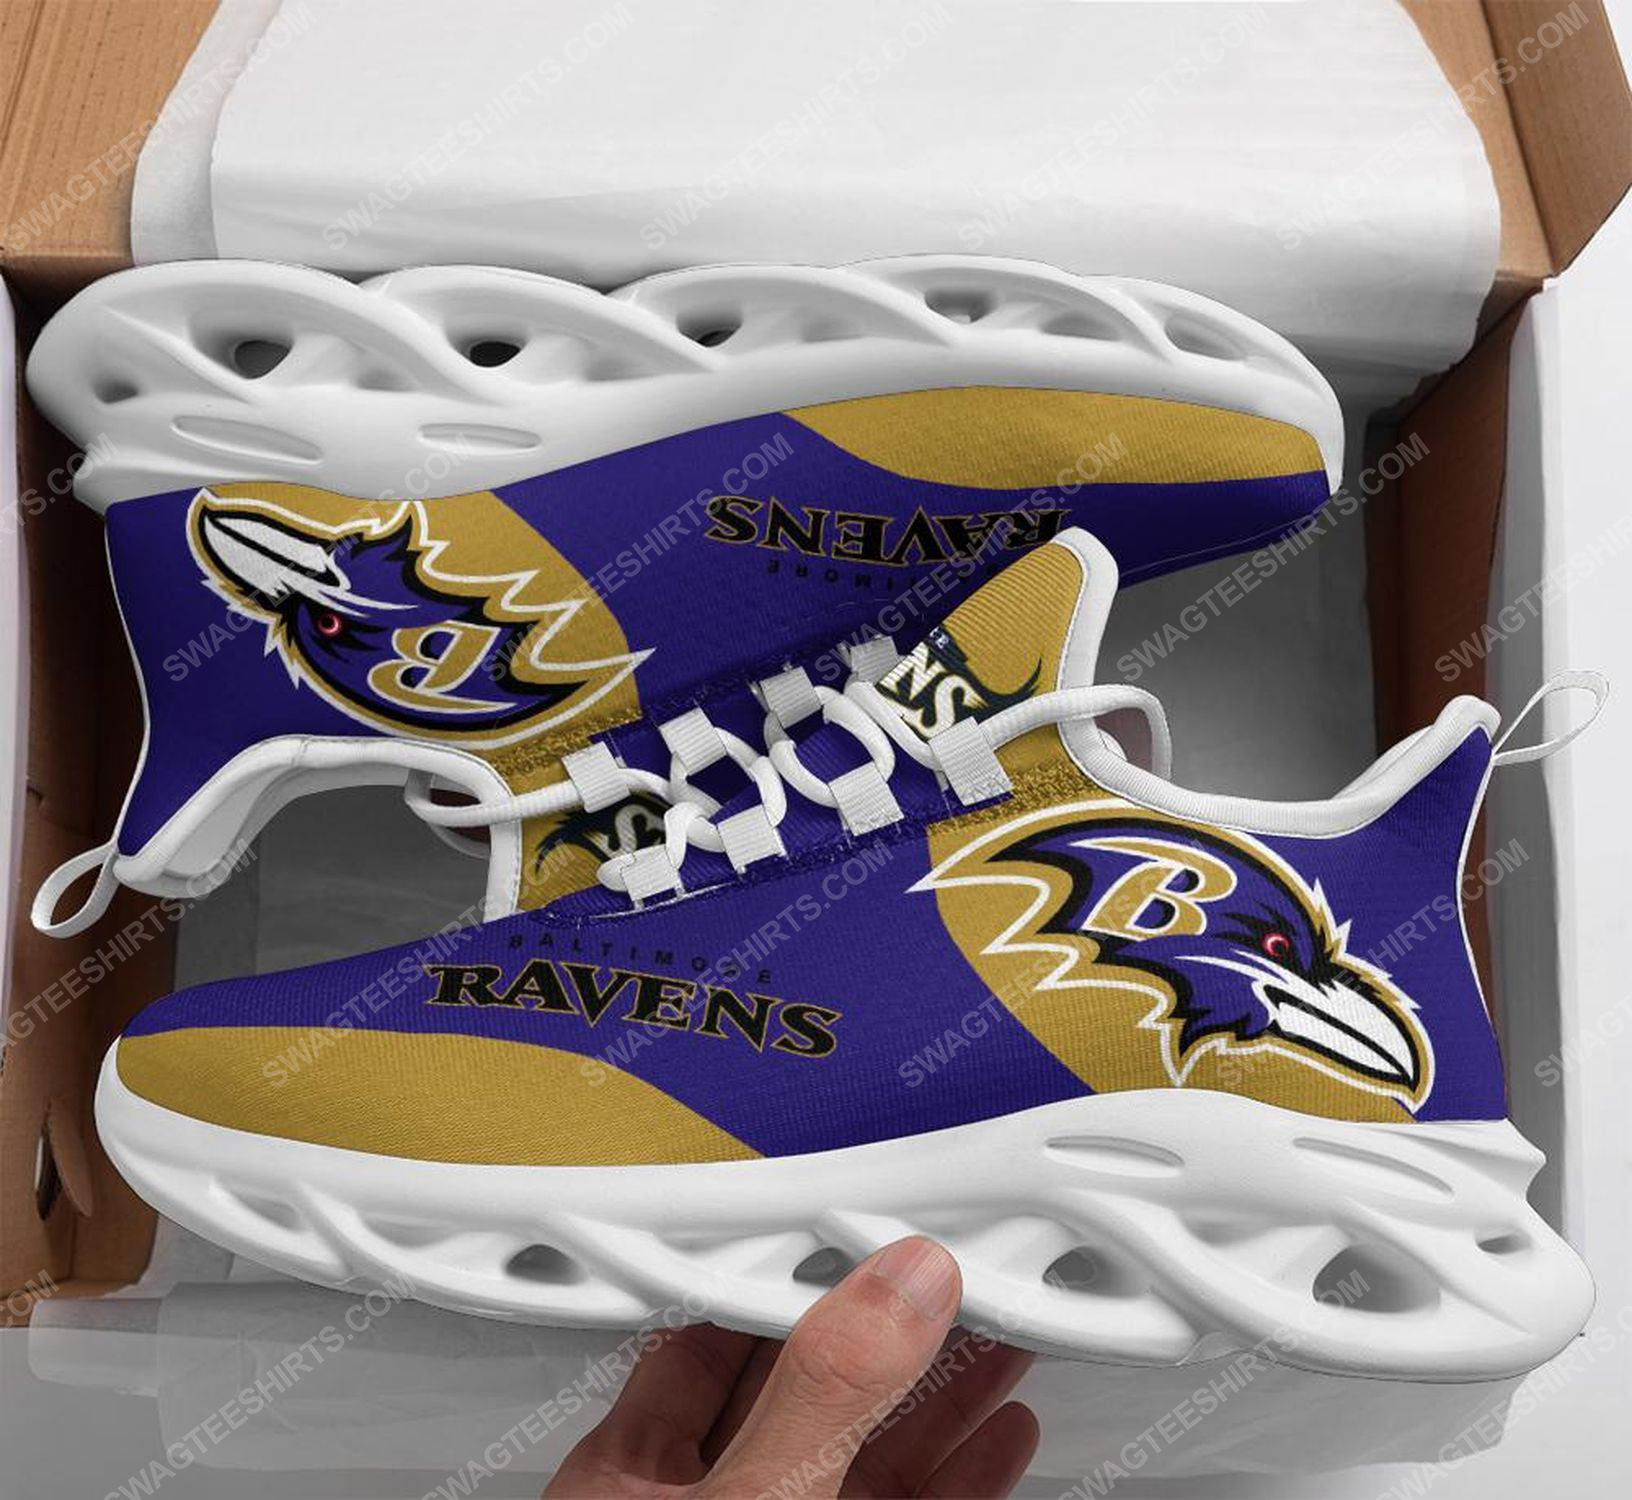 The baltimore ravens football team max soul shoes 1